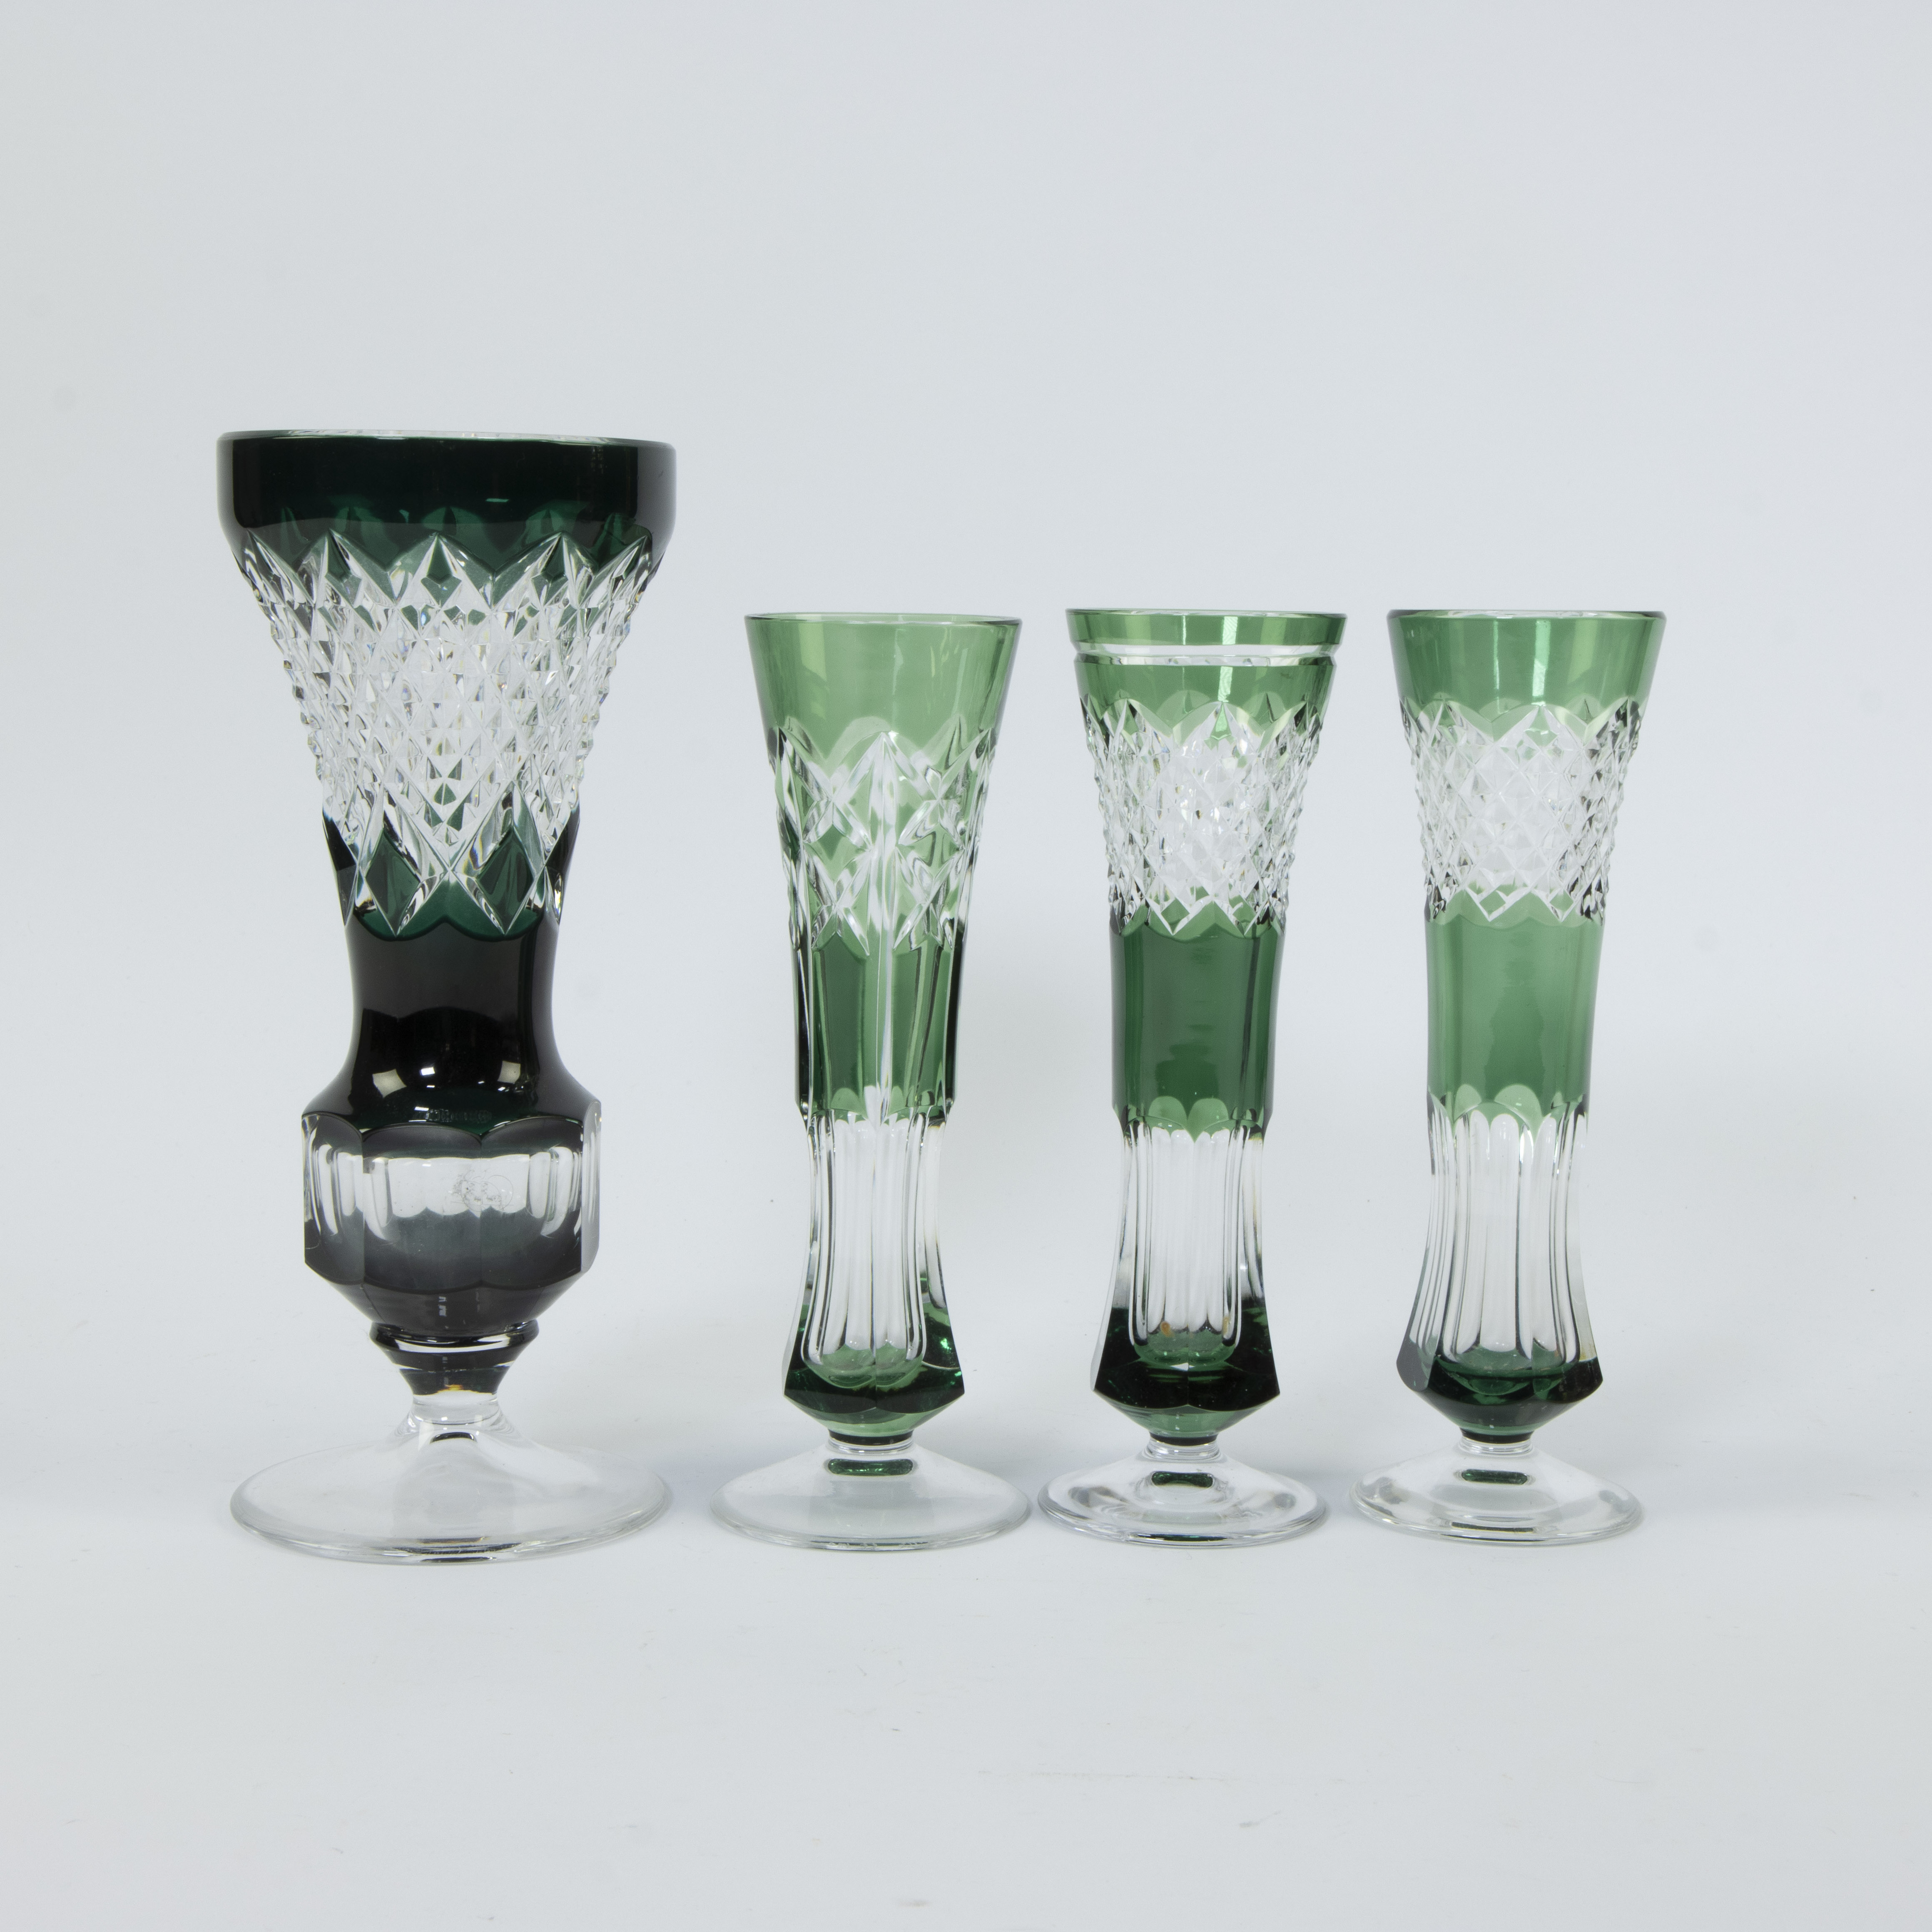 Collection of 4 green and clear cut crystal vases Val Saint Lambert - Image 2 of 4